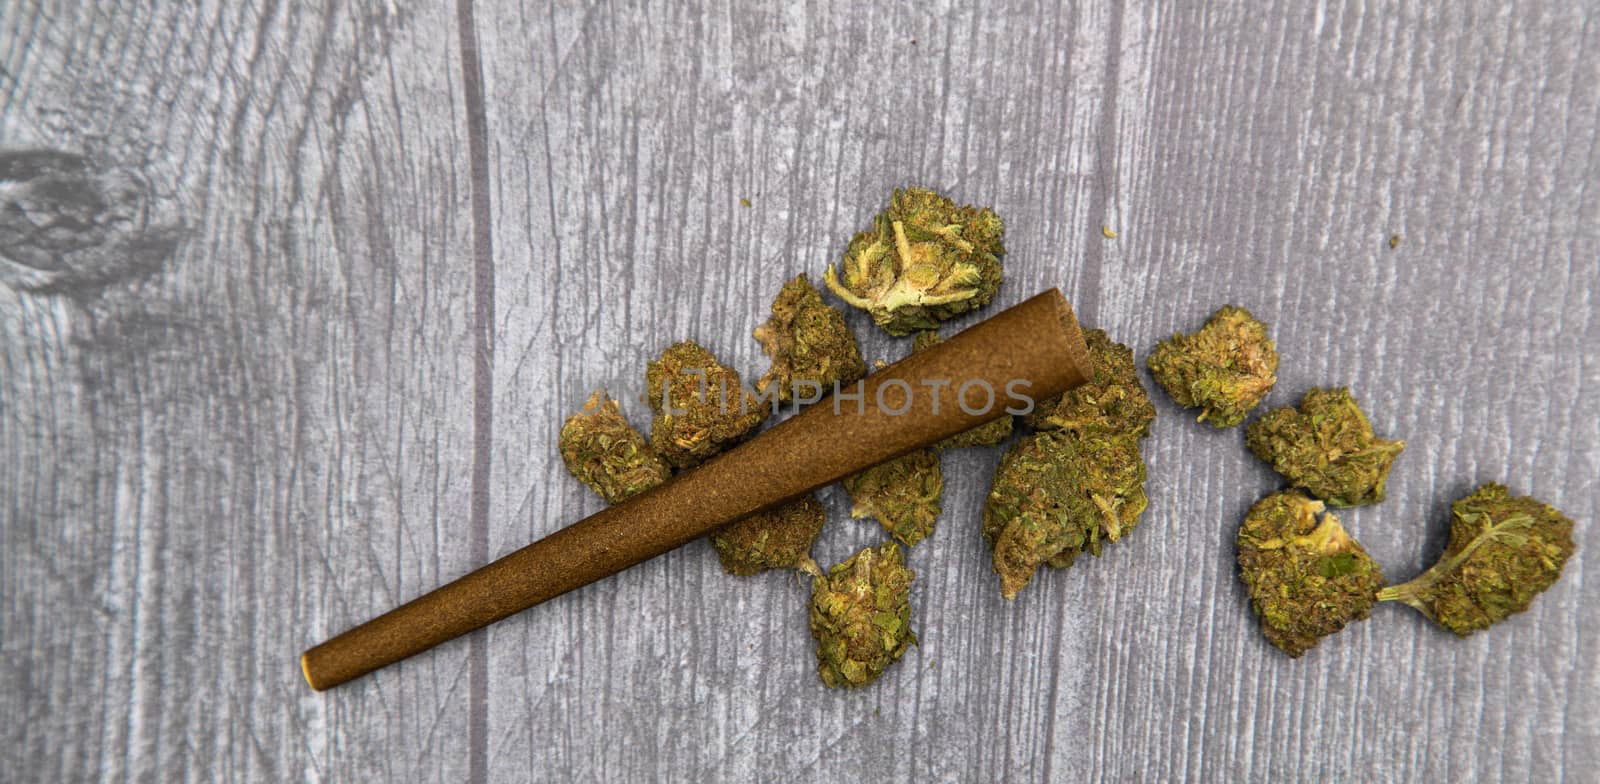 Large green buds of medical marijuana sit on a wooden table with a hemp wrap, ready to be smoked.